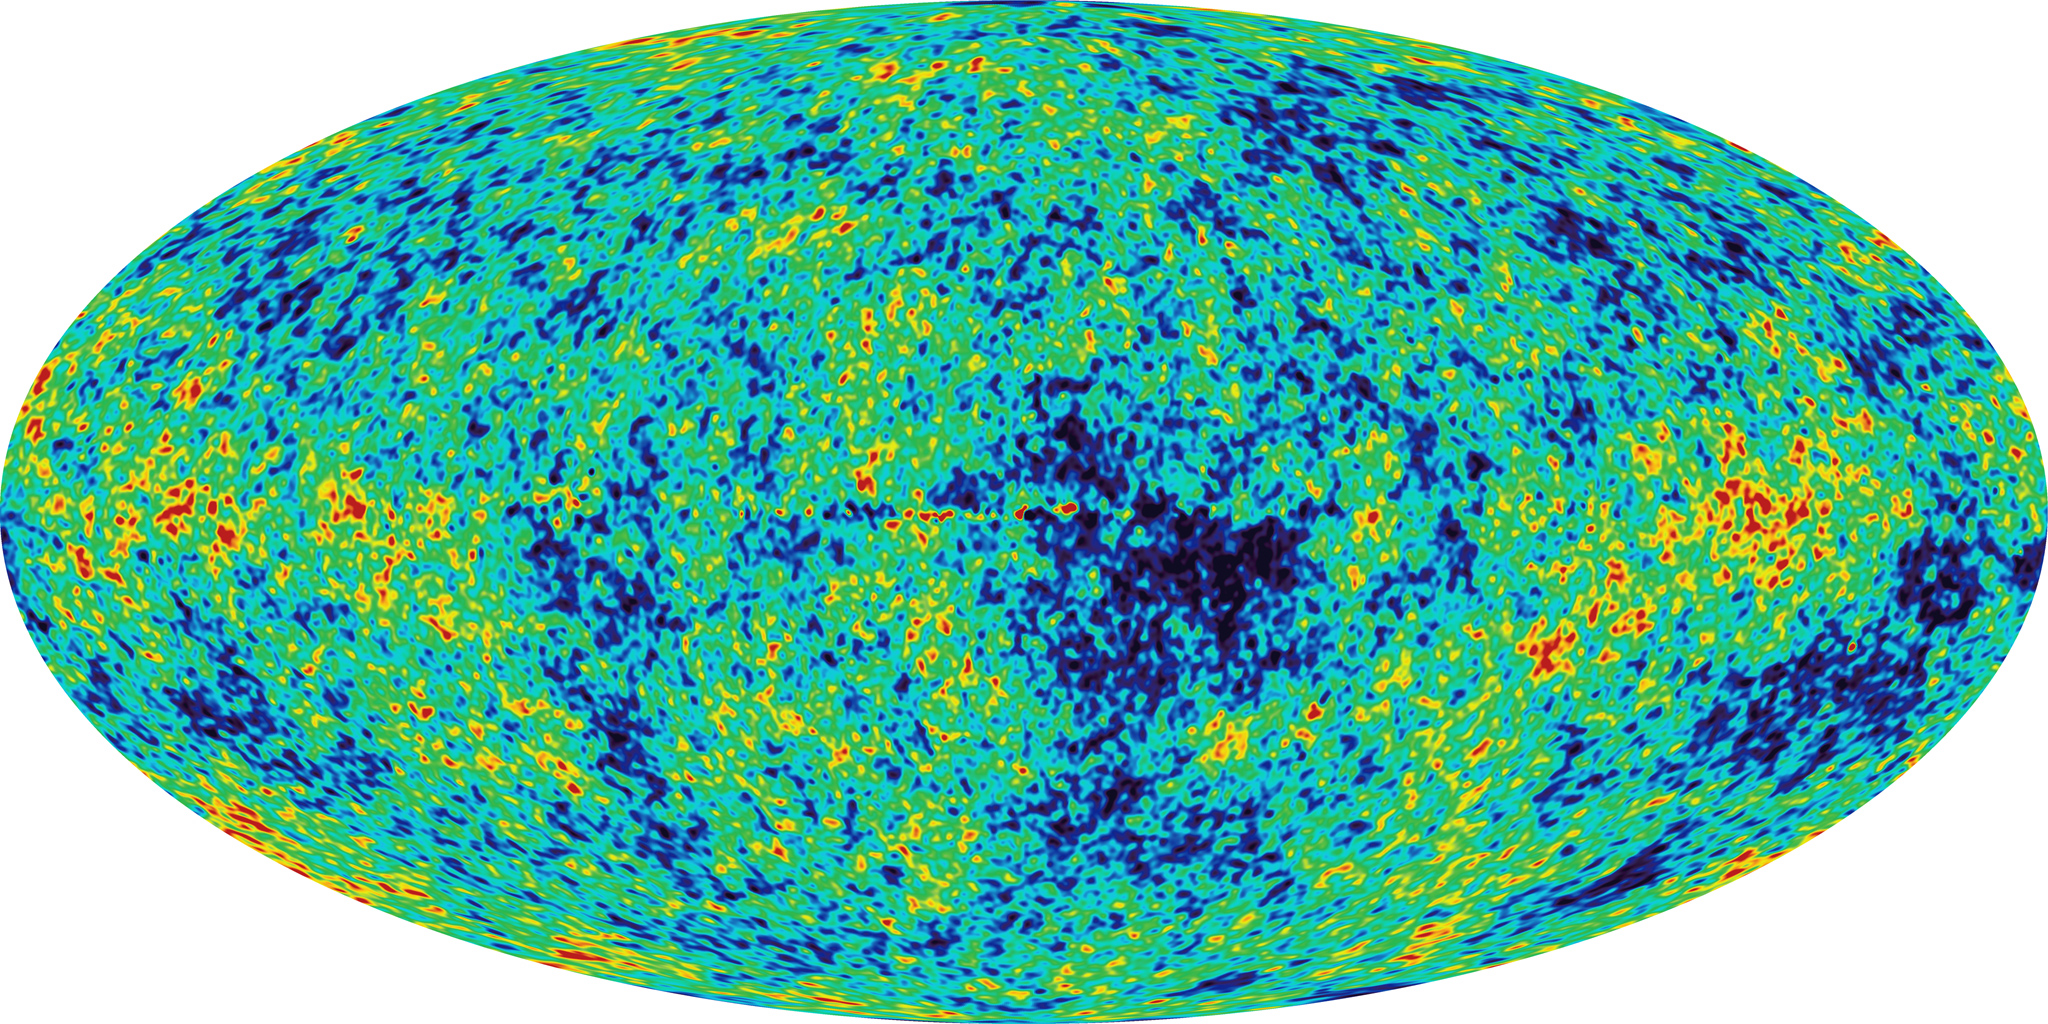 WMAP Resolves the Universe